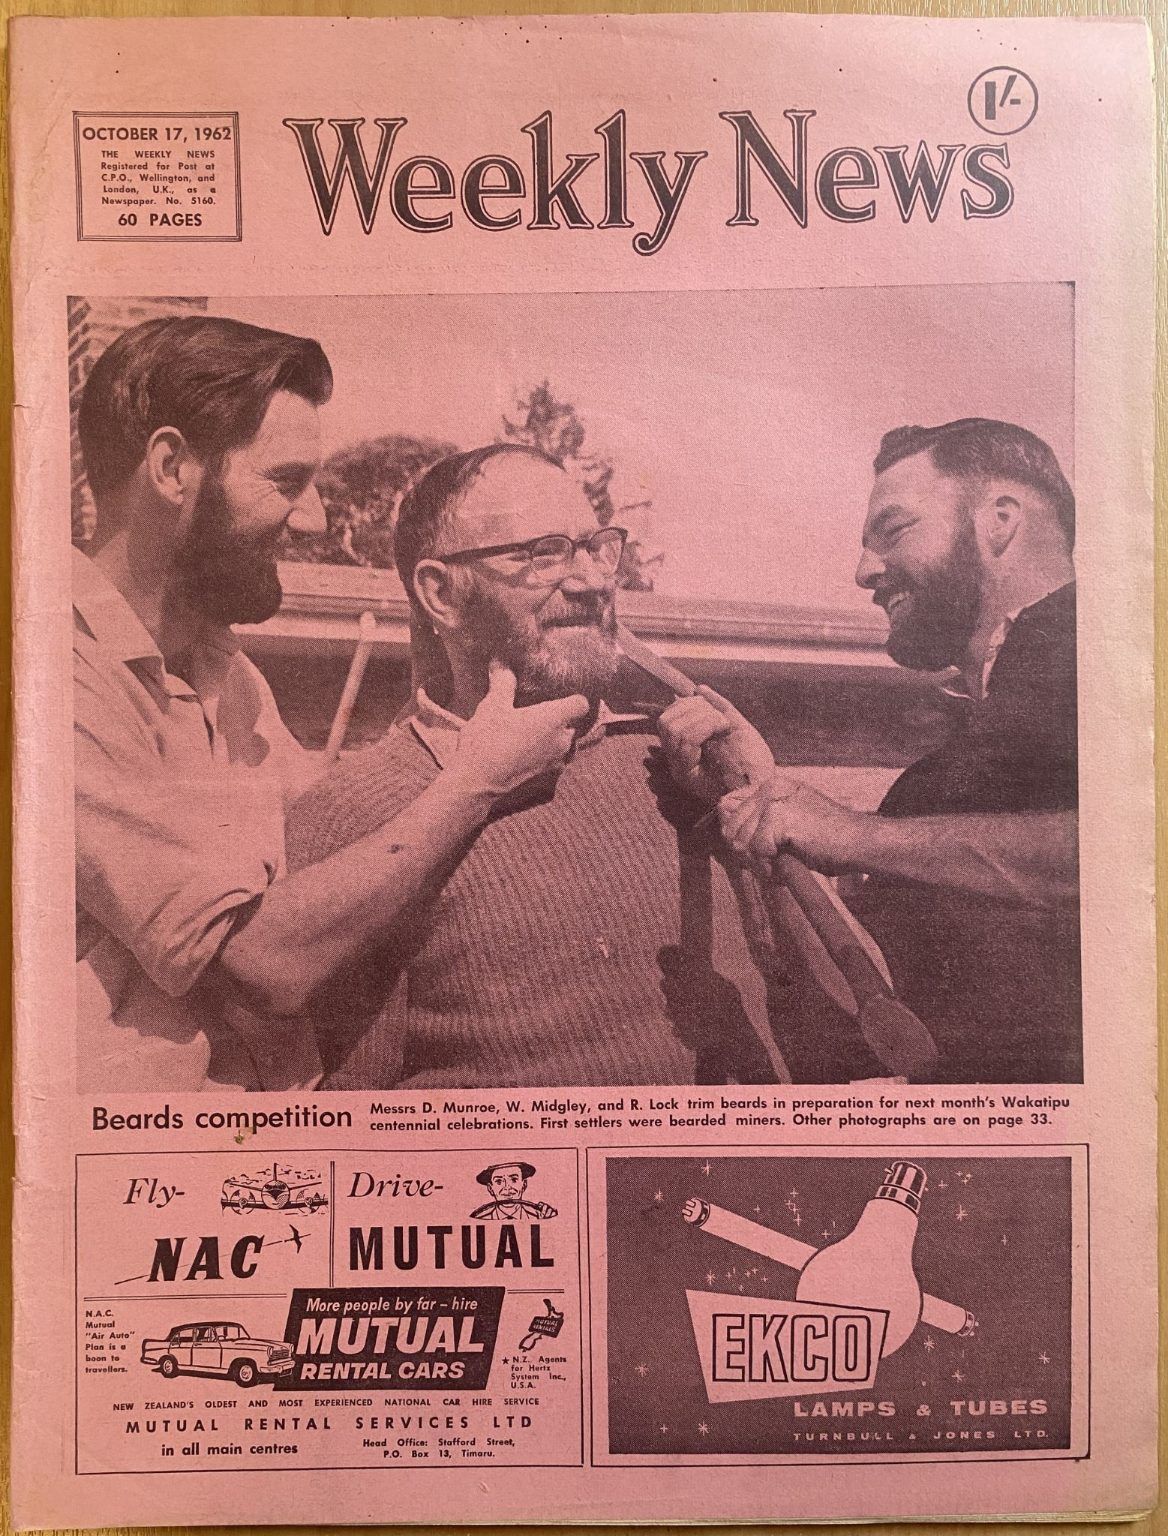 OLD NEWSPAPER: The Weekly News, No. 5160, 17 October 1962